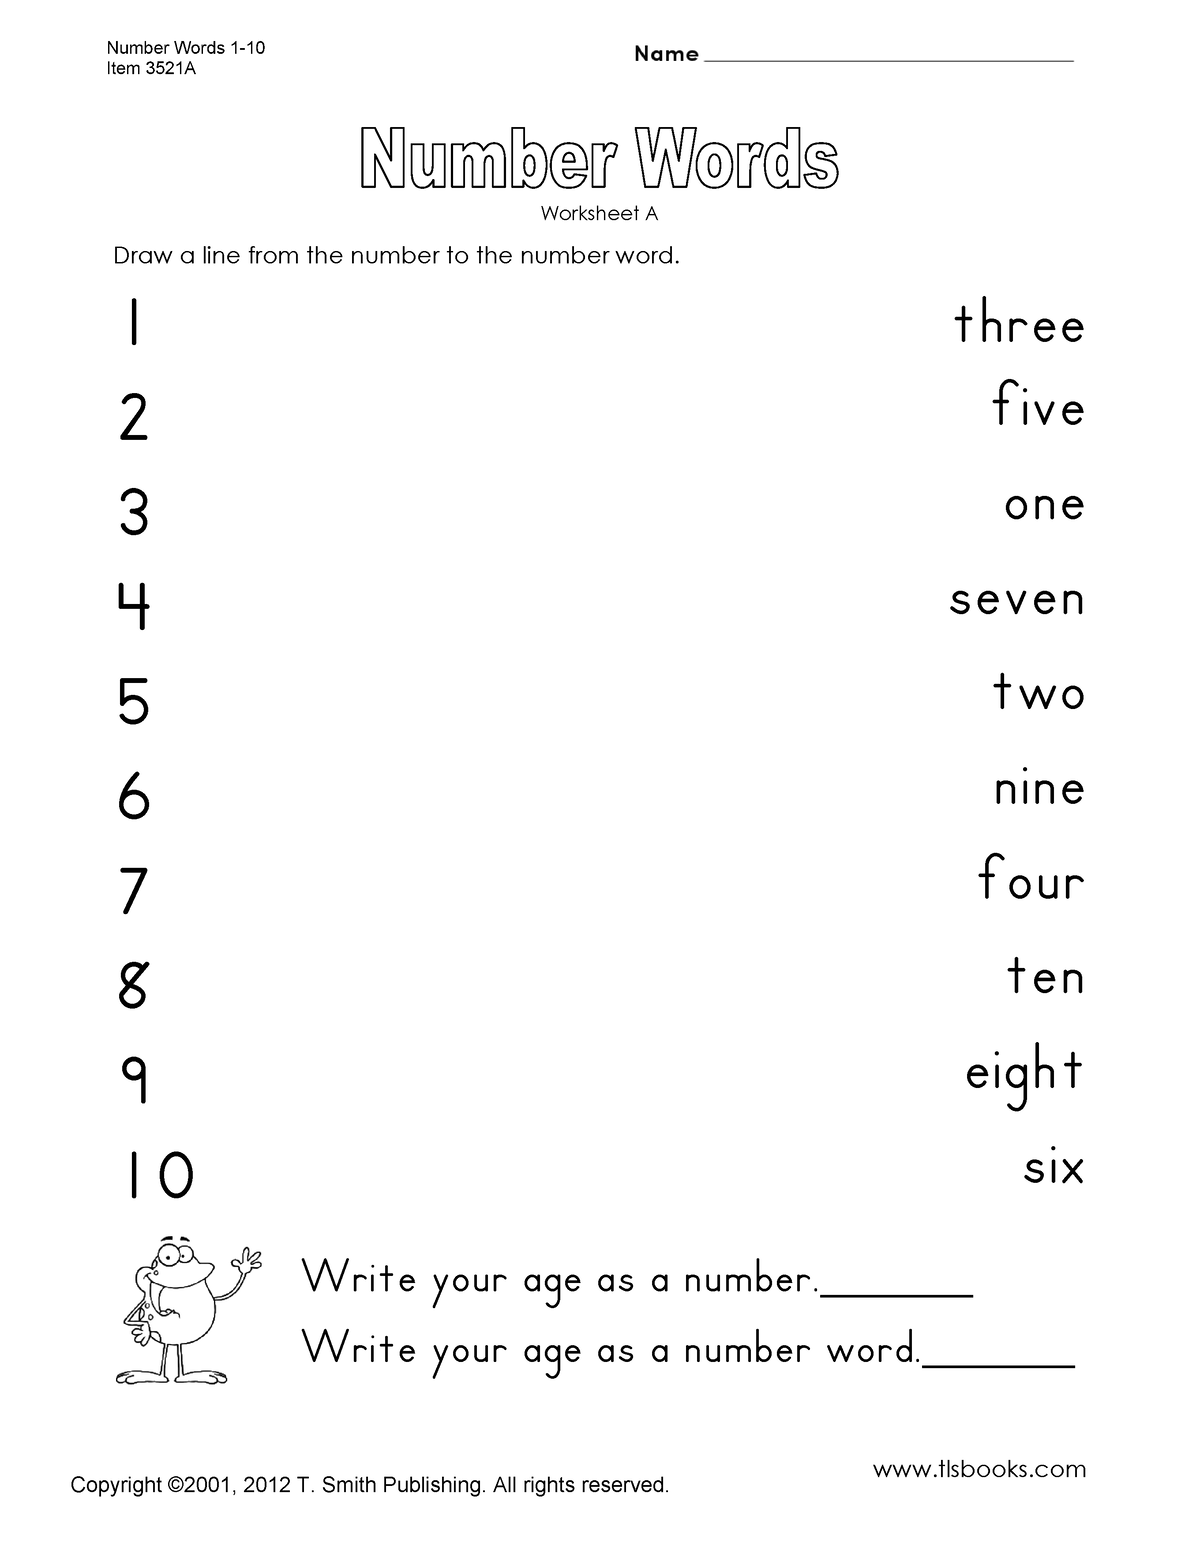 numberwords-sds-number-words-1-item-3521a-tlsbooks-worksheet-a-draw-a-line-from-the-number